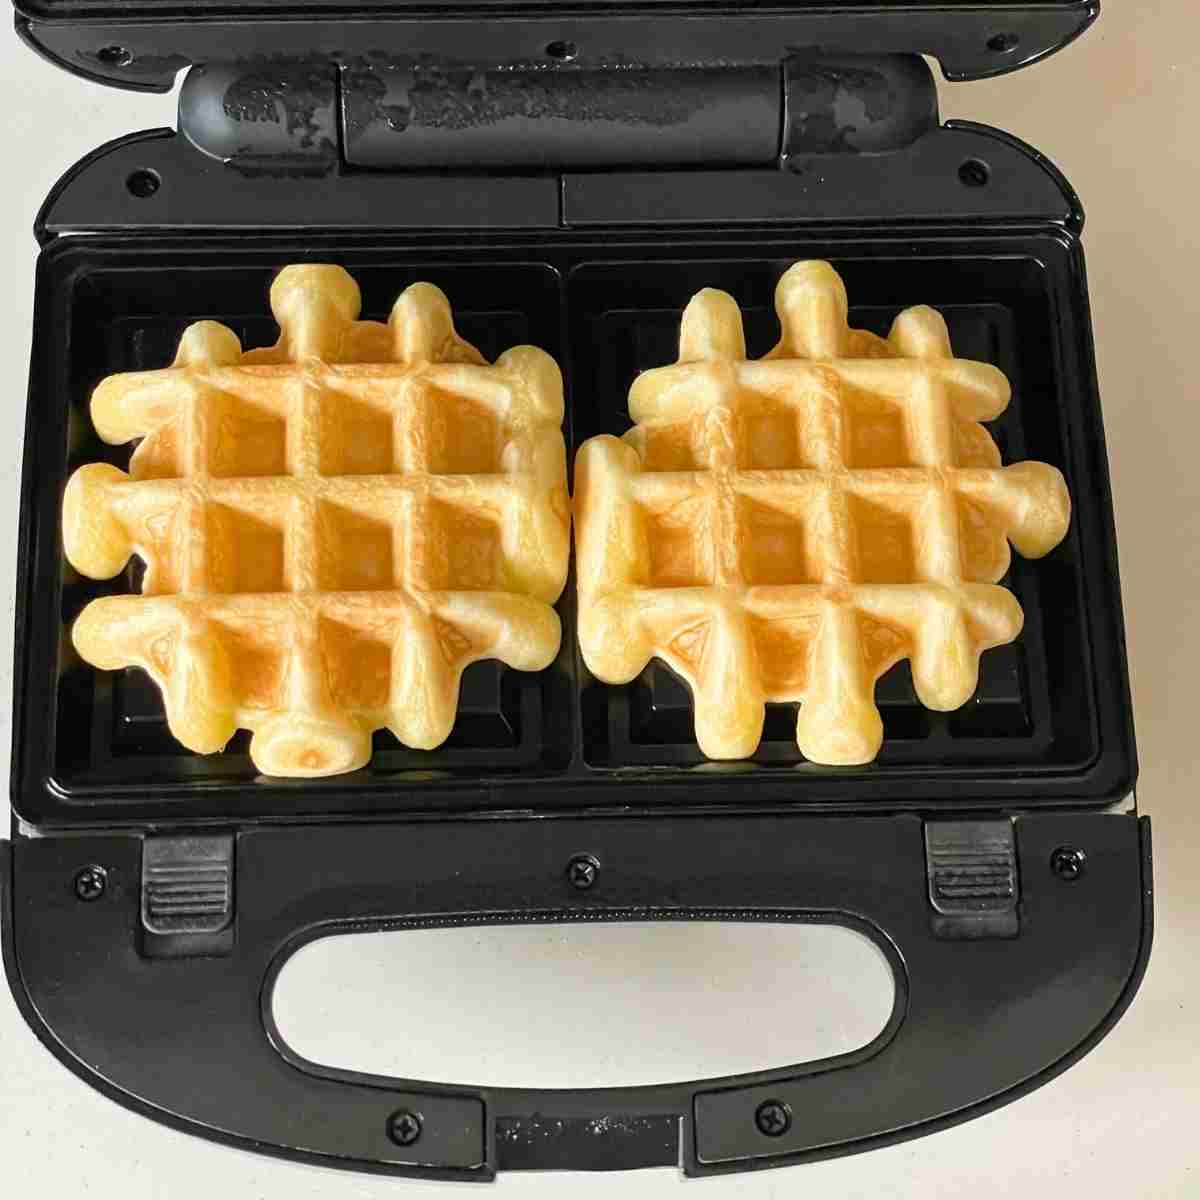 Waffle maker with waffles on it